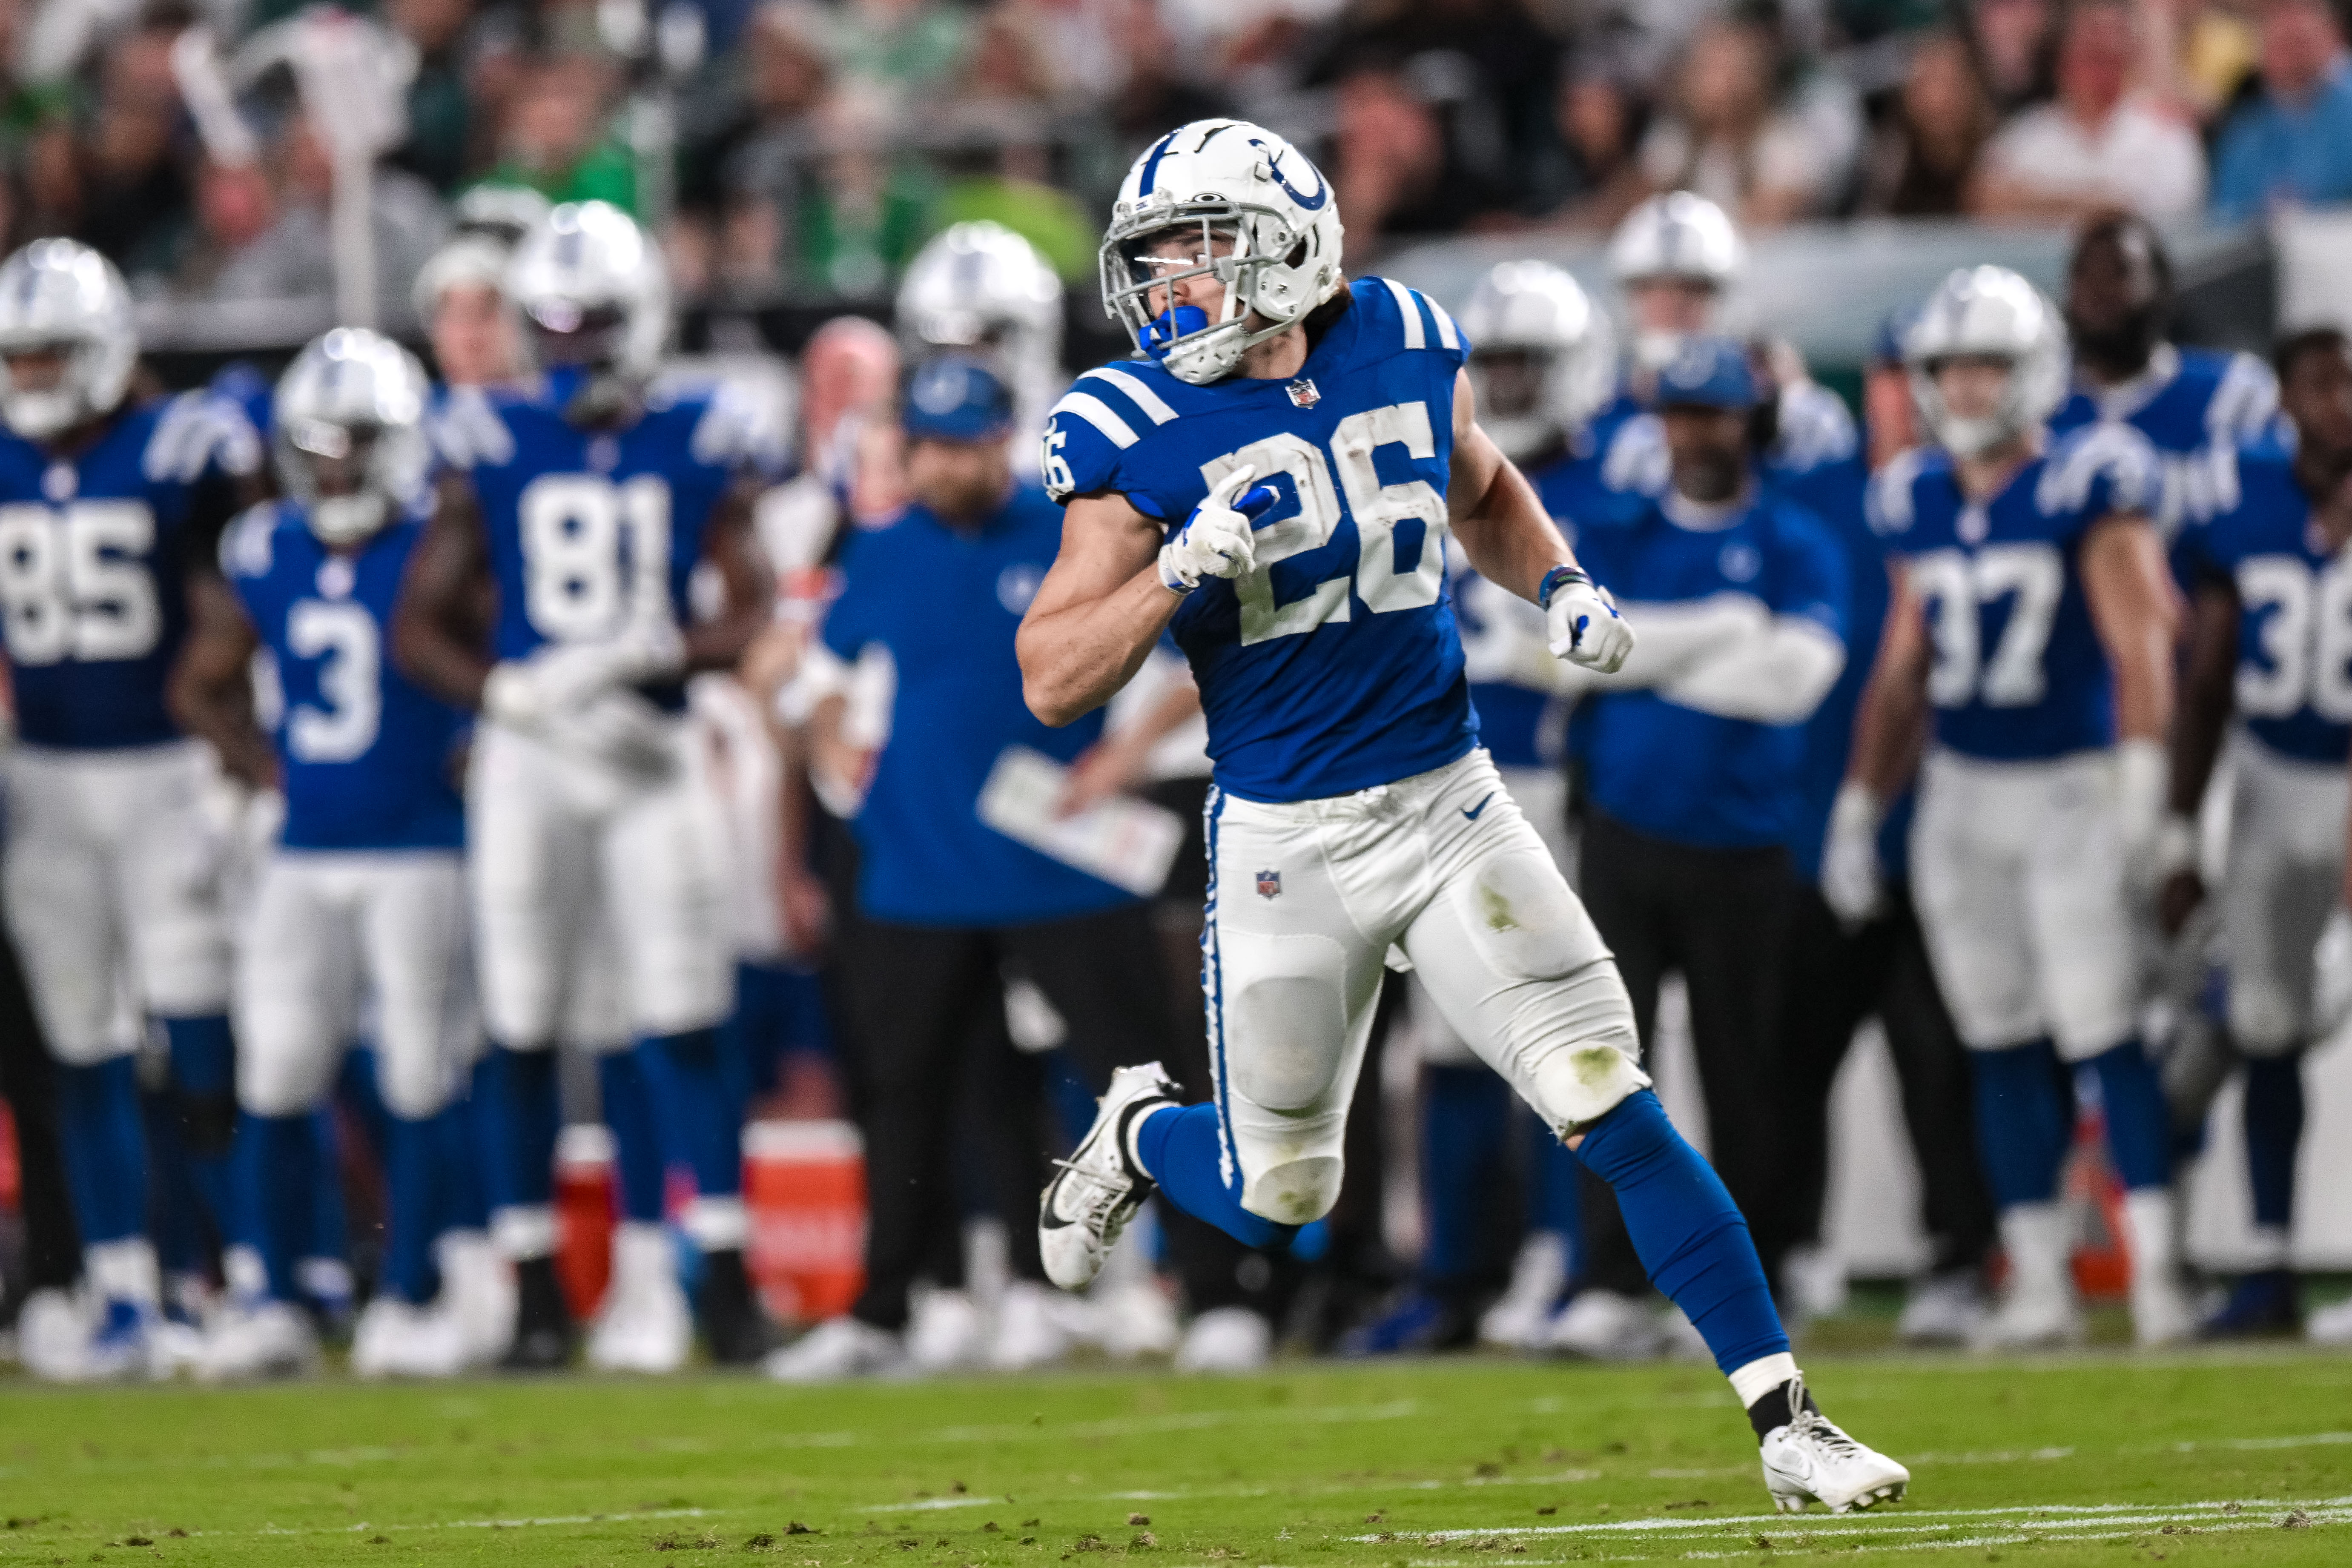 Indianapolis Colts running back Evan Hull (26) in action during the preseason NFL game between the Philadelphia Eagles and Indianapolis Colts on August 24, 2023 at Lincoln Financial Field in Philadelphia, PA.